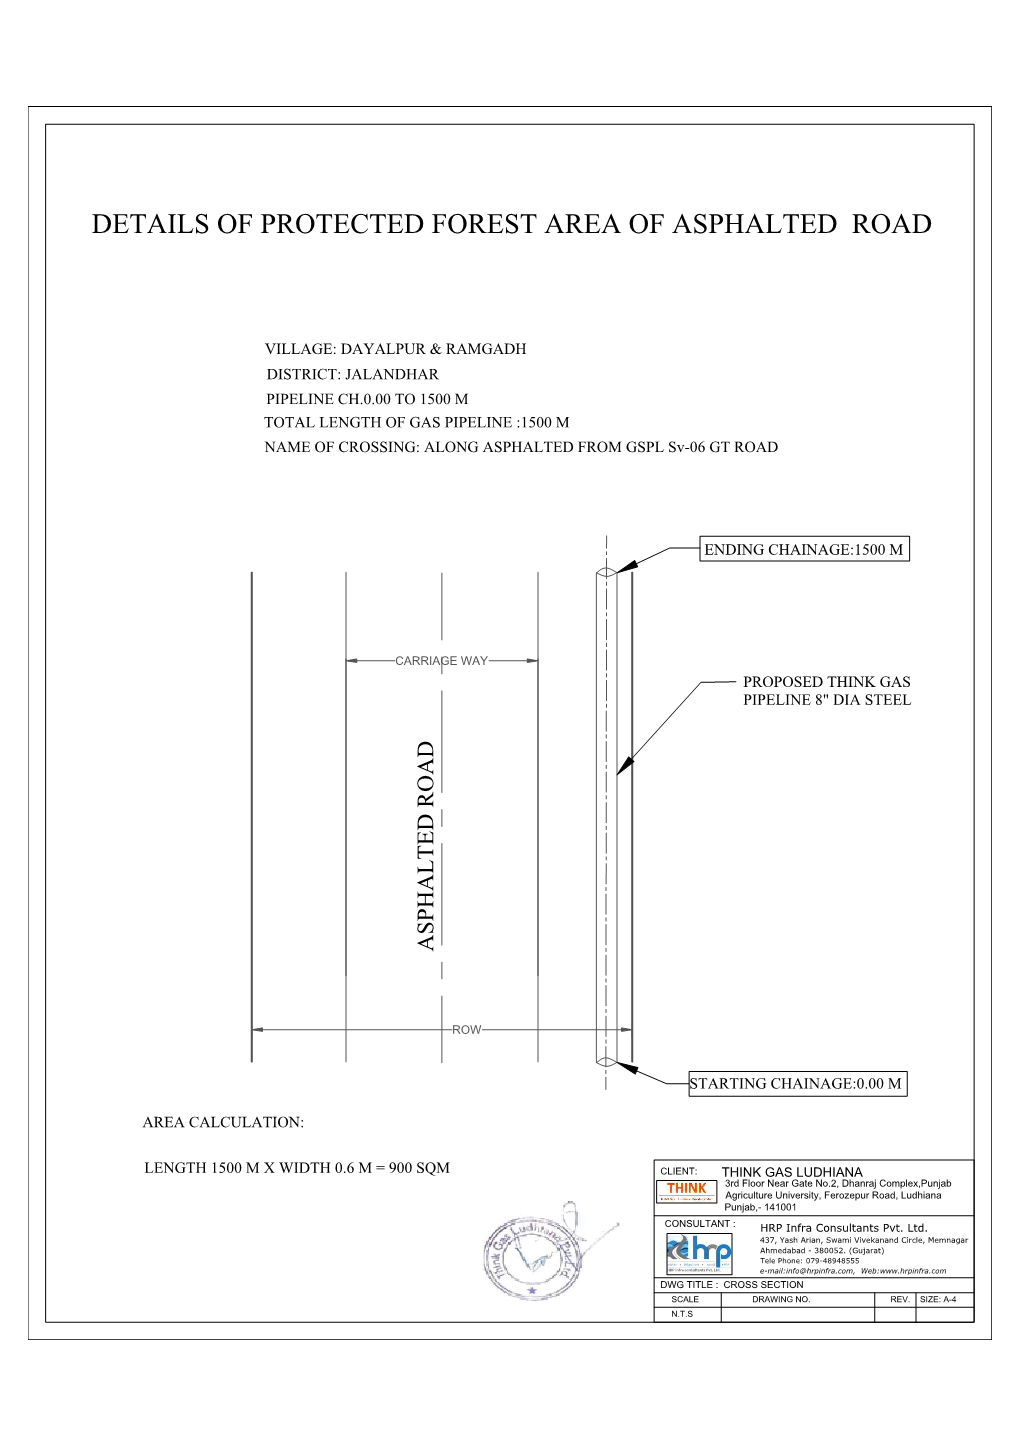 Details of Protected Forest Area of Asphalted Road 1